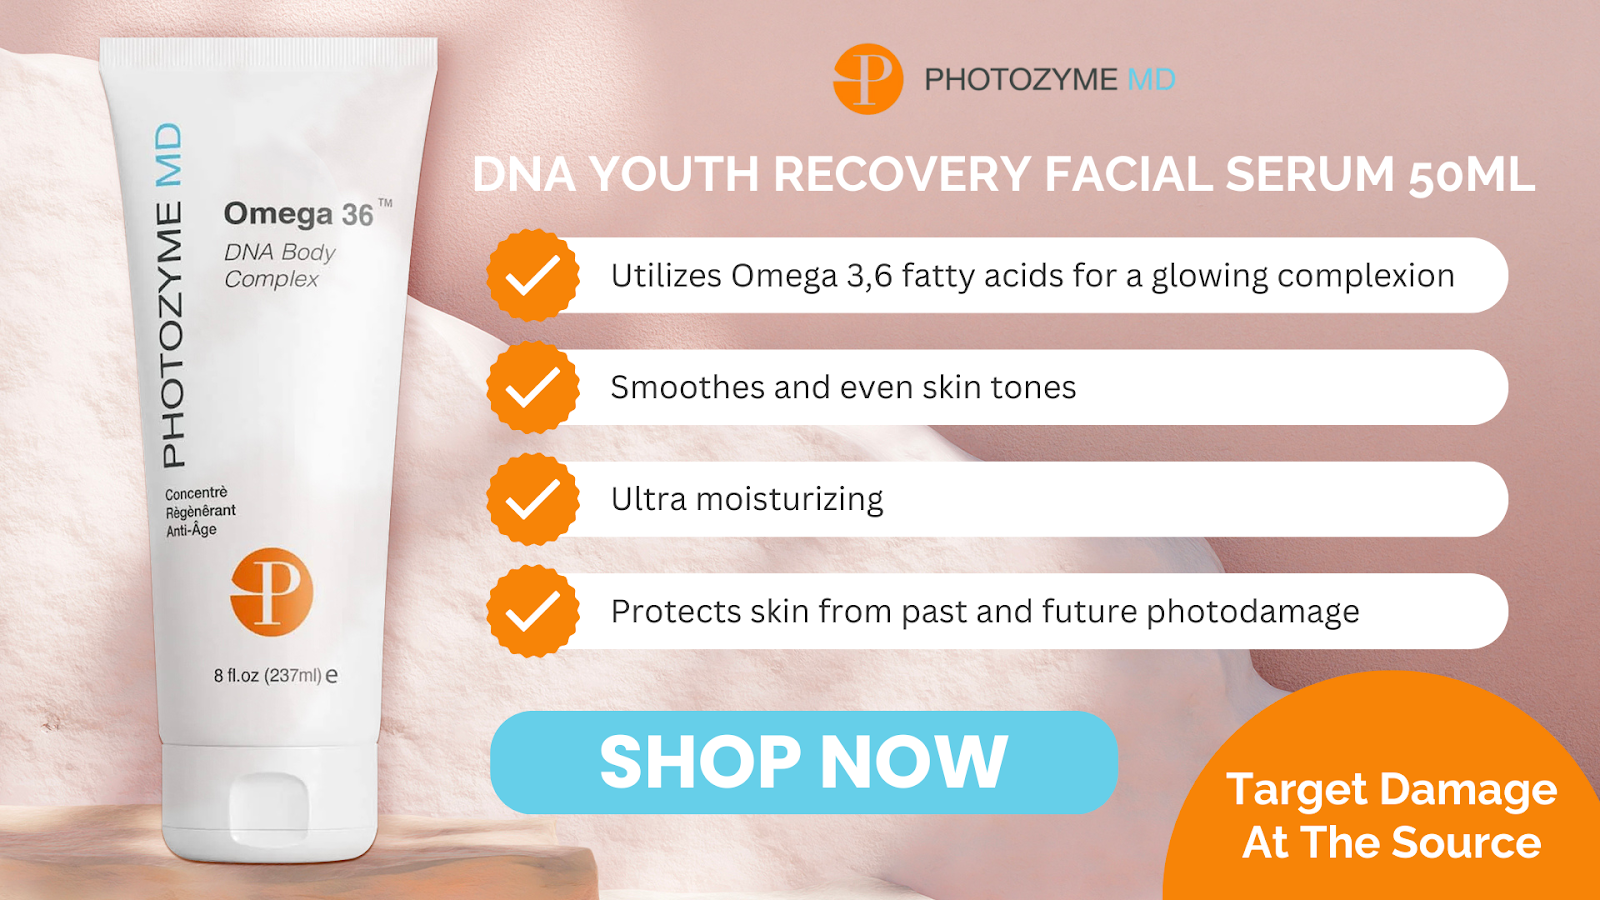 Incorporate omega-3 in your skin routine for healthy, glowing skin